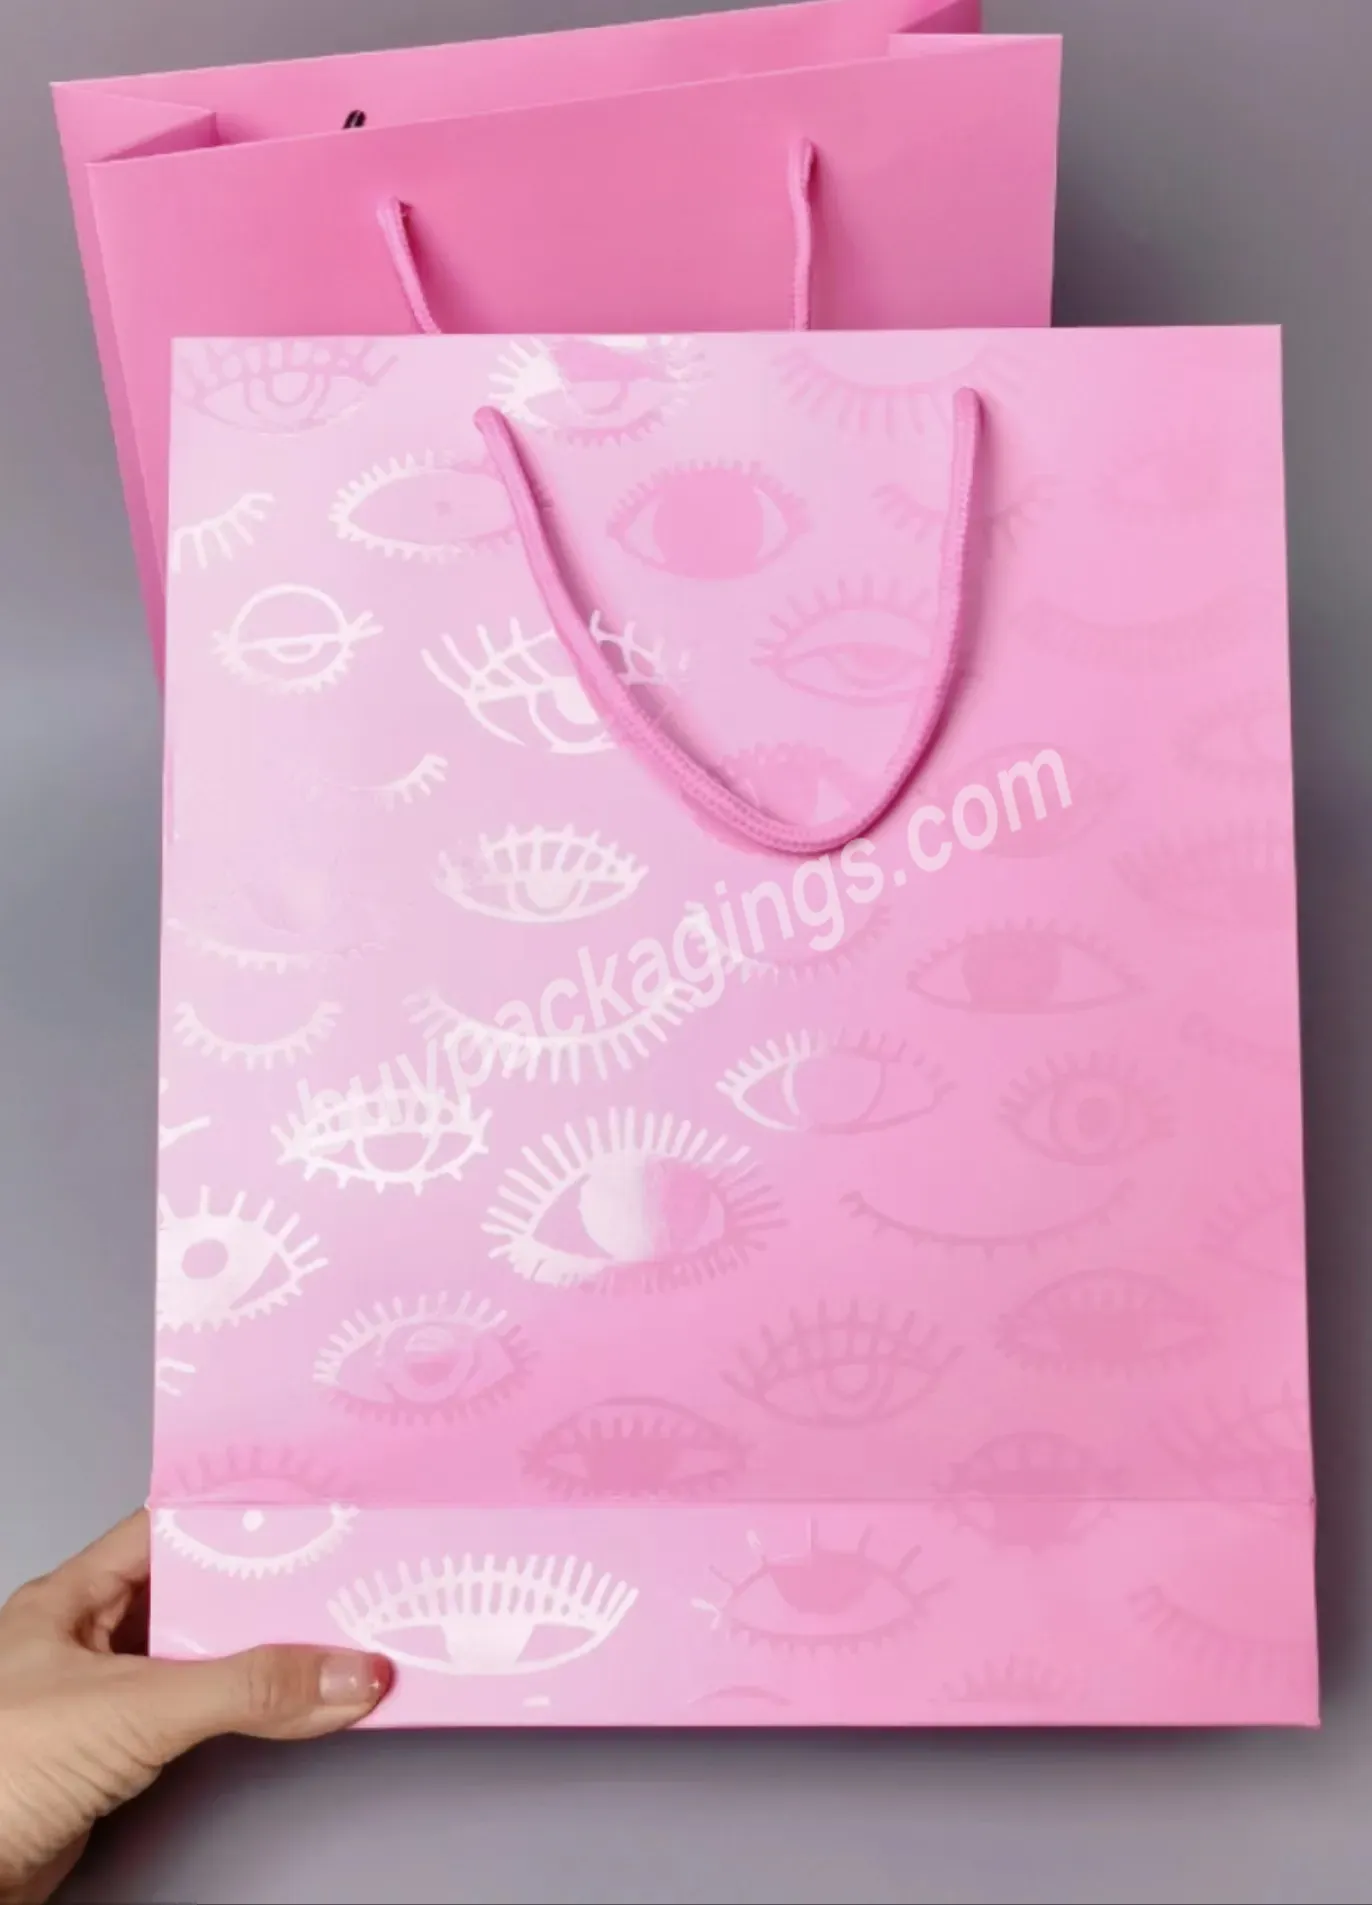 230g Custom Pink Paper Bags With Silver Foil Stamping Uv Spot Printed For Packaging Laser